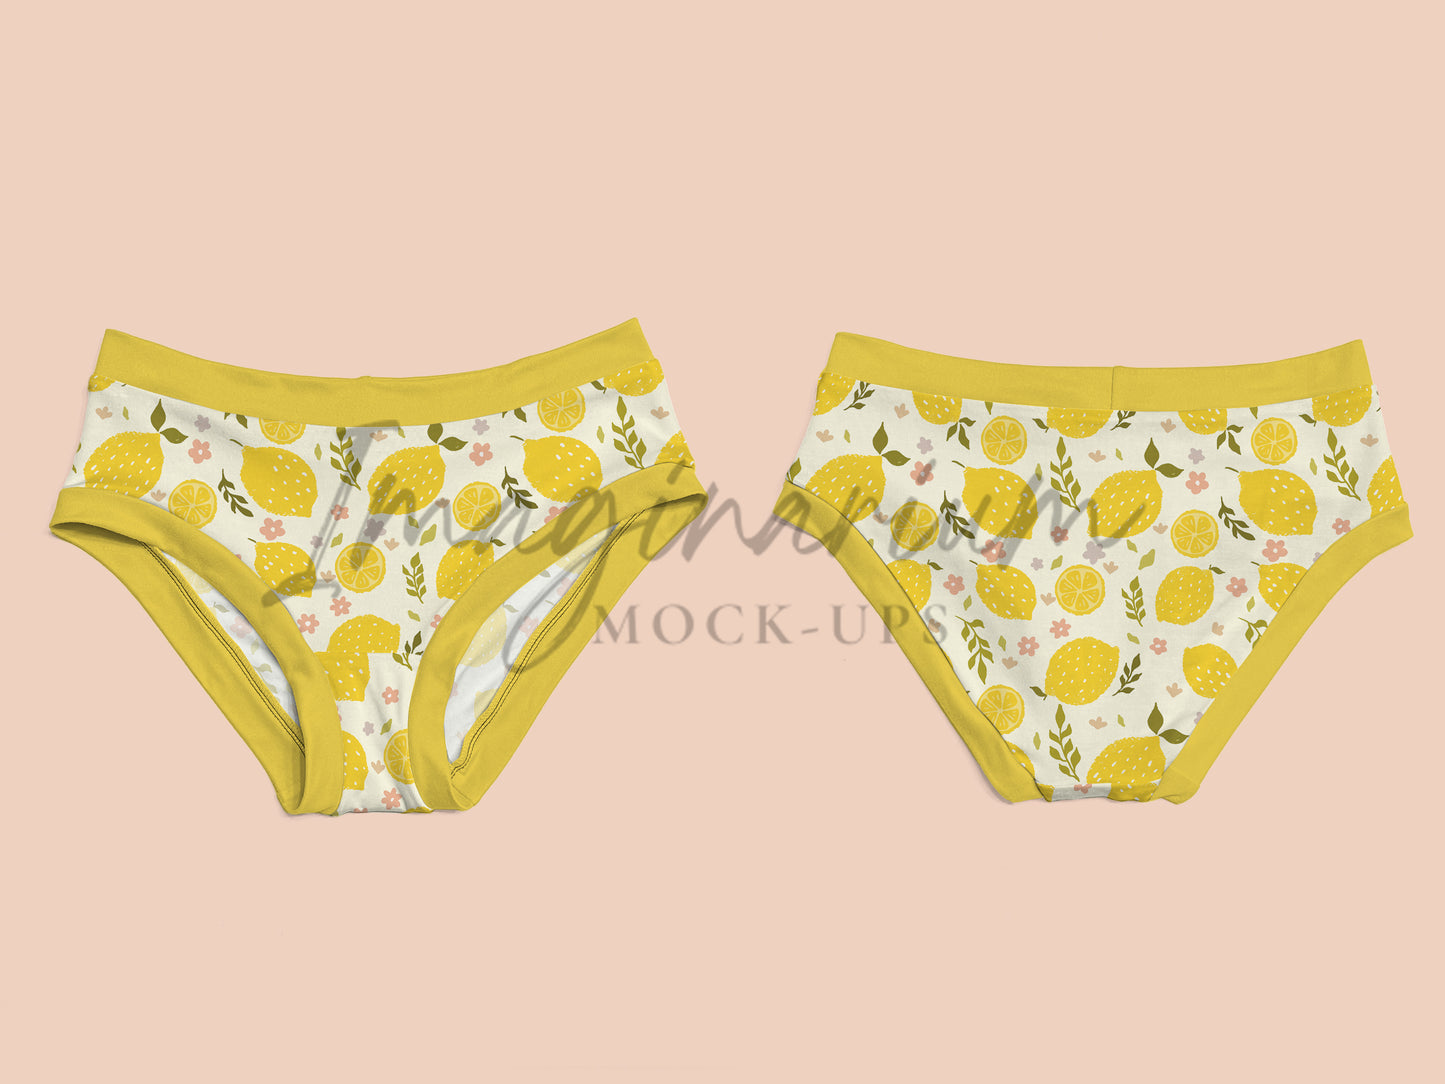 Underwear Mock Up, Panties Mock-up front and back view, Realistic Clothing Mockup for Photoshop and Procreate